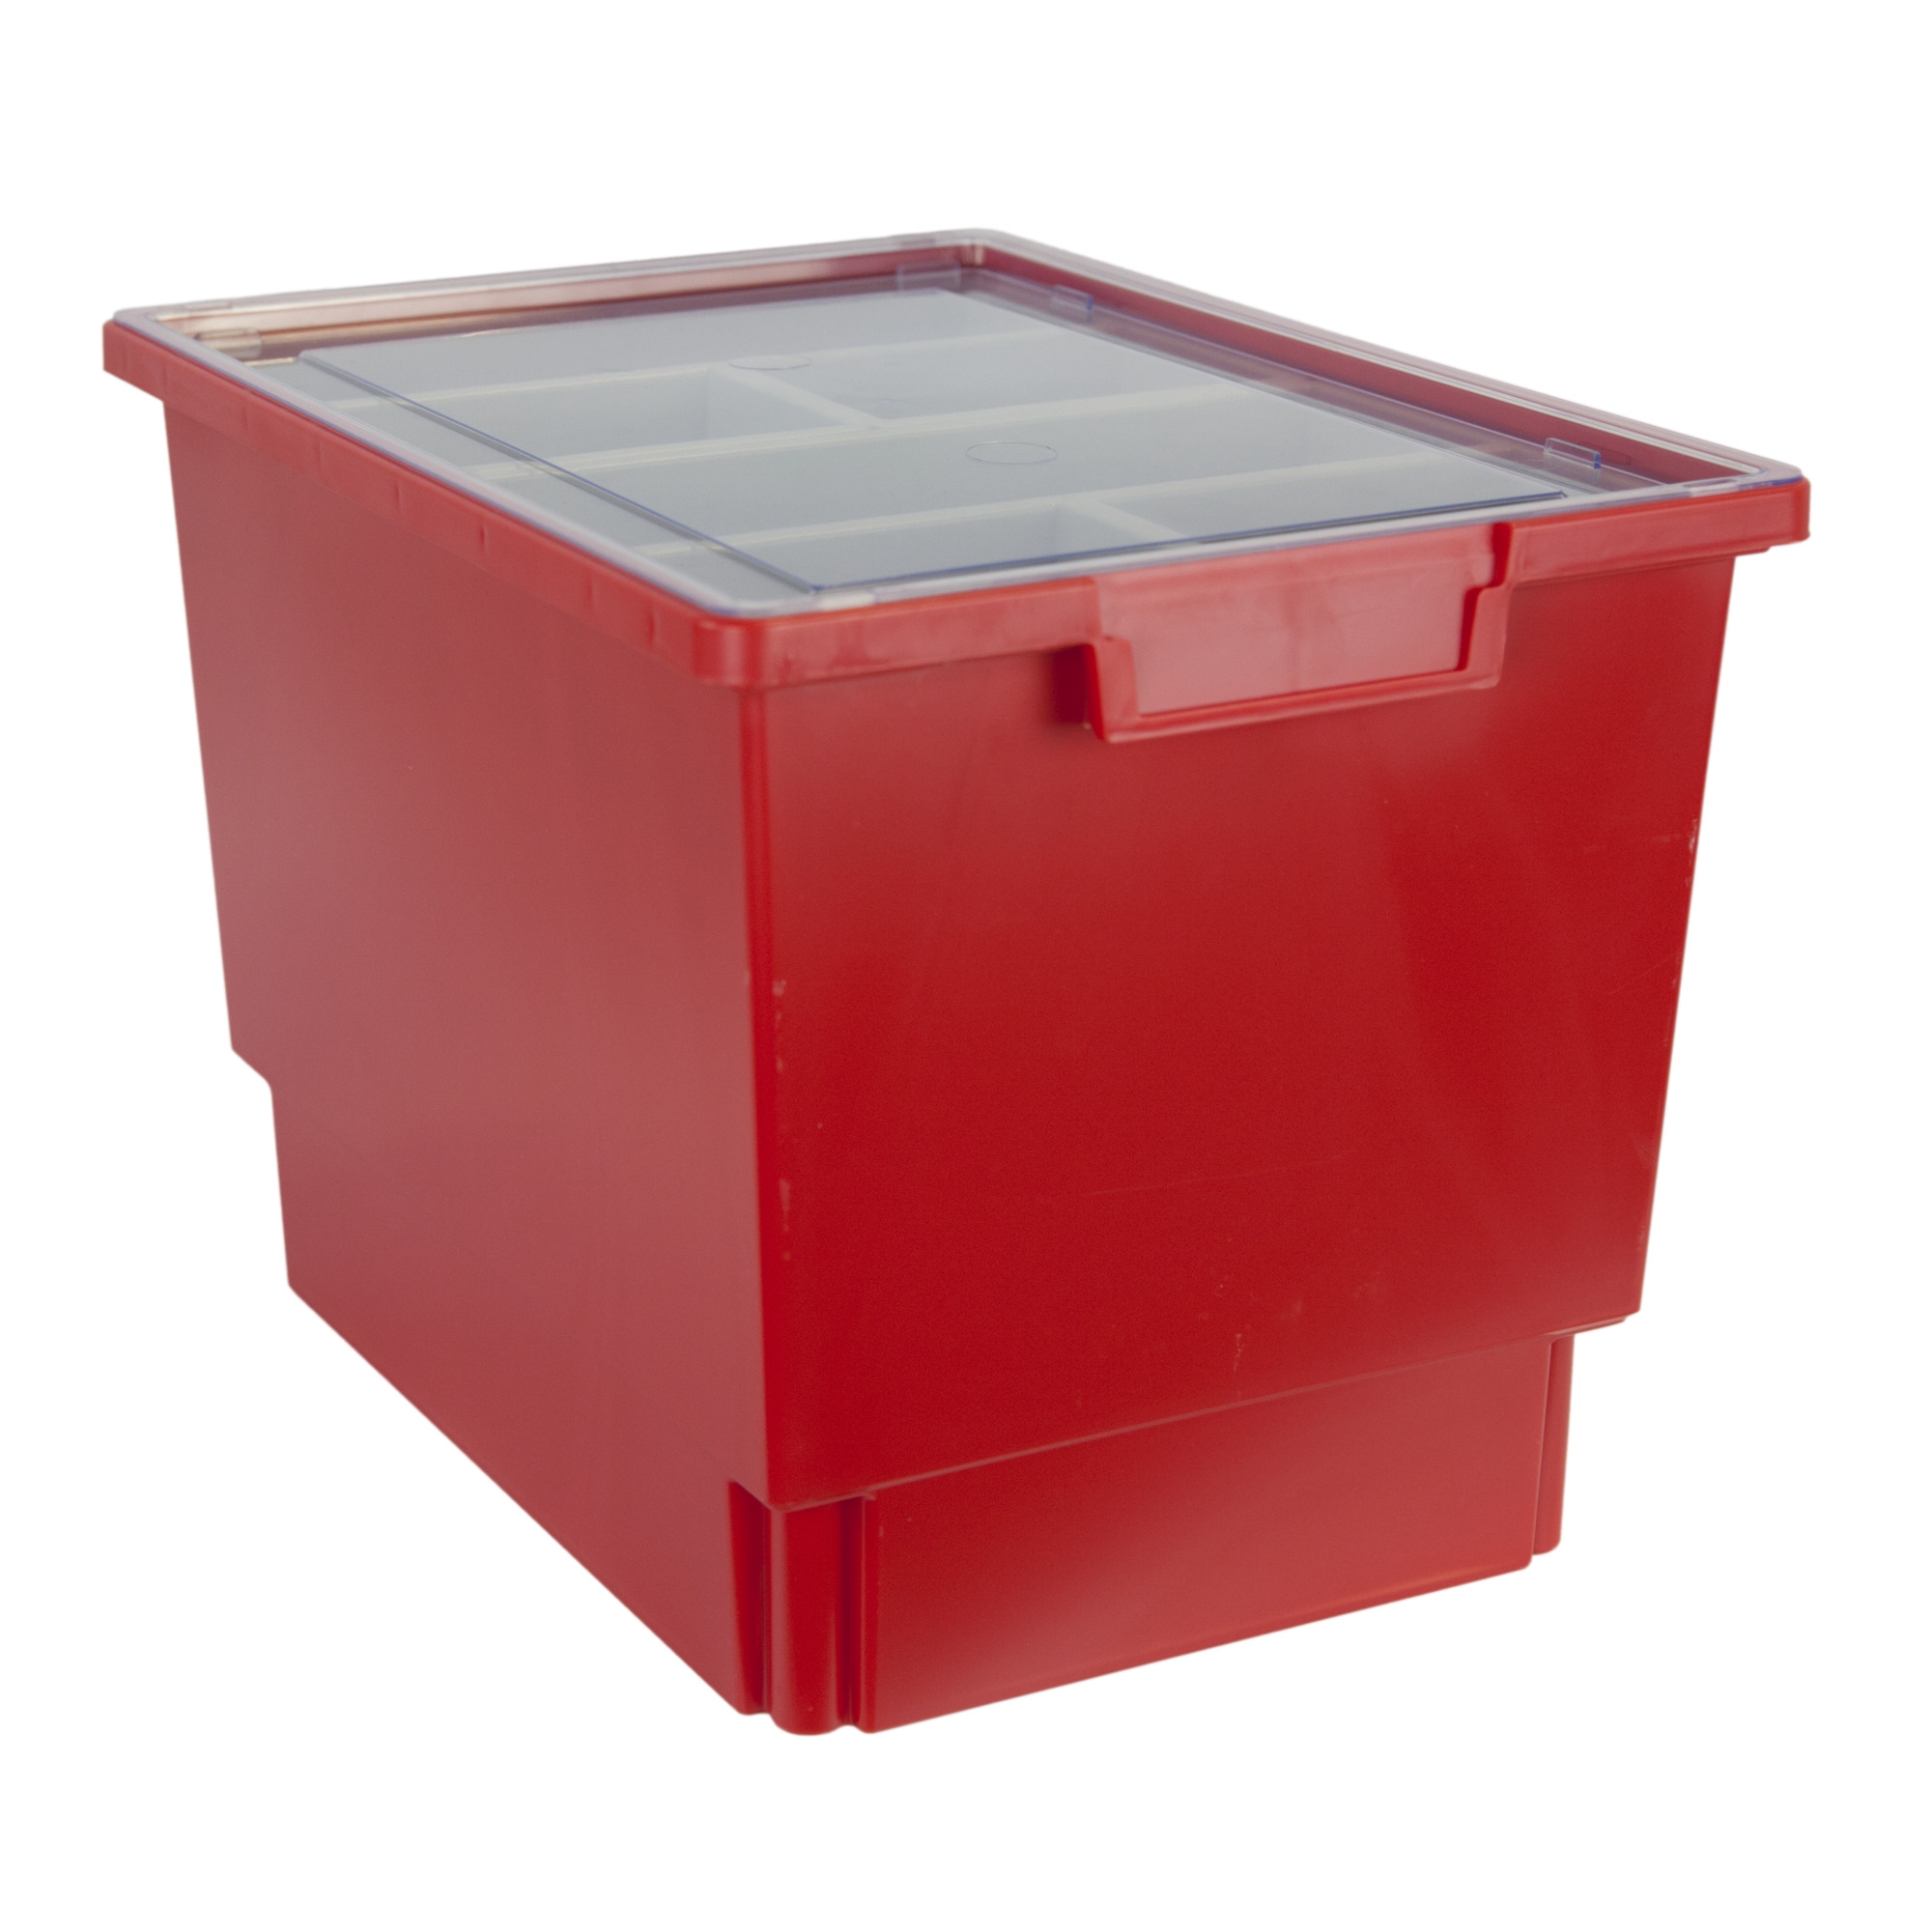 Certwood StorWerks, Slim Line 12Inch Tray Kit (3 x Divisions) Red-3PK, Included (qty.) 3, Material Plastic, Height 12 in, Model CE1954PR-NK0202-3